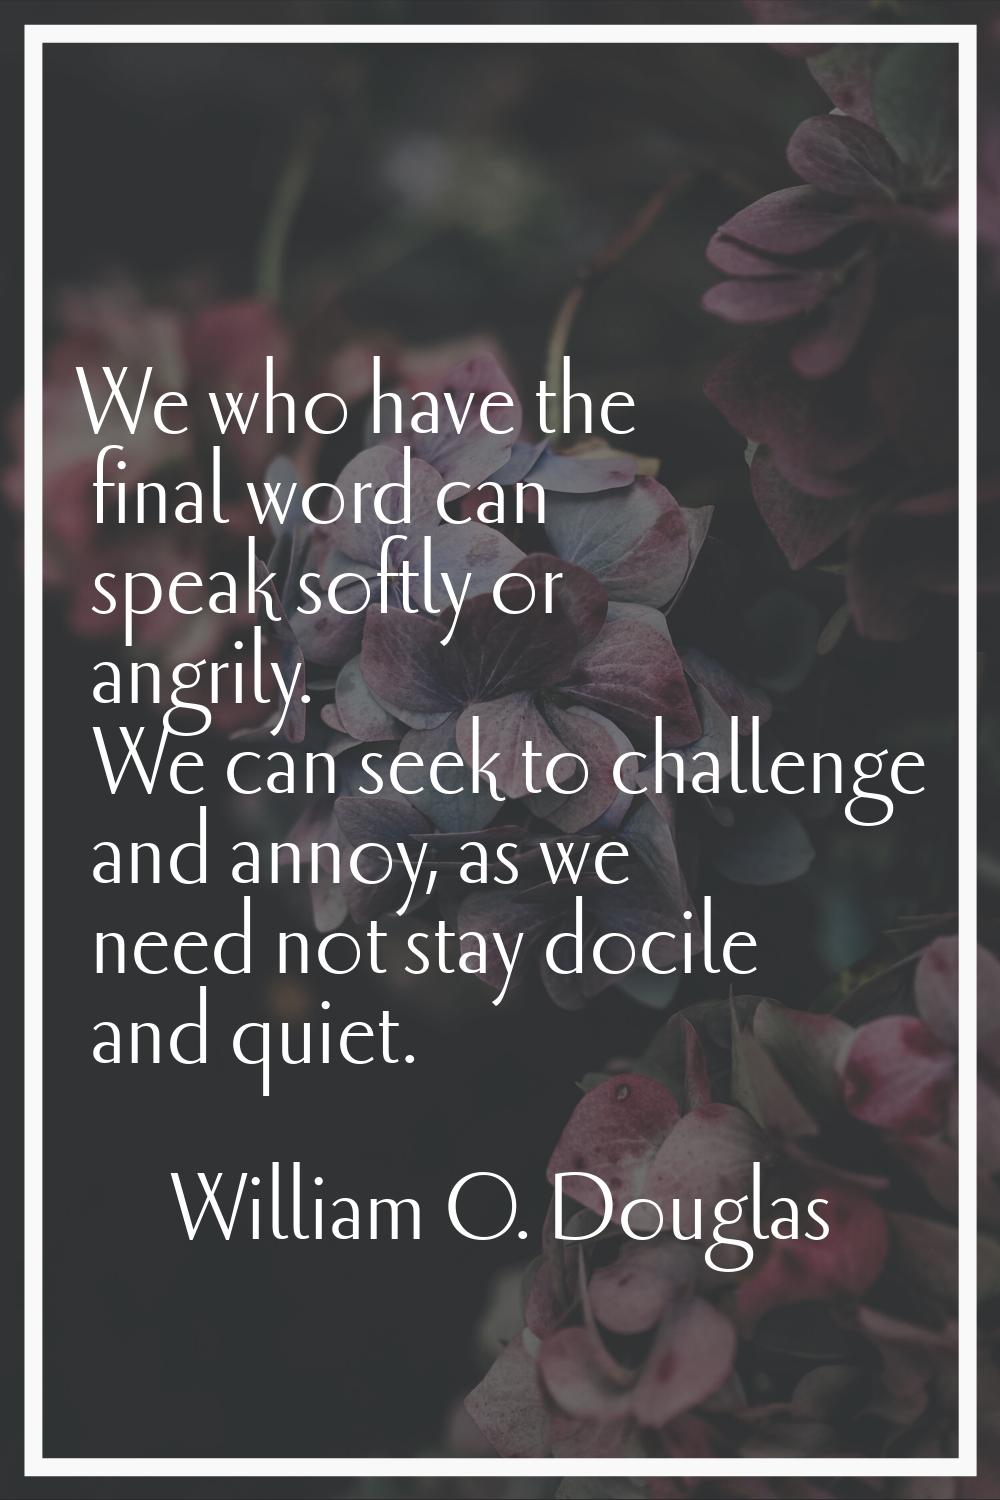 We who have the final word can speak softly or angrily. We can seek to challenge and annoy, as we n